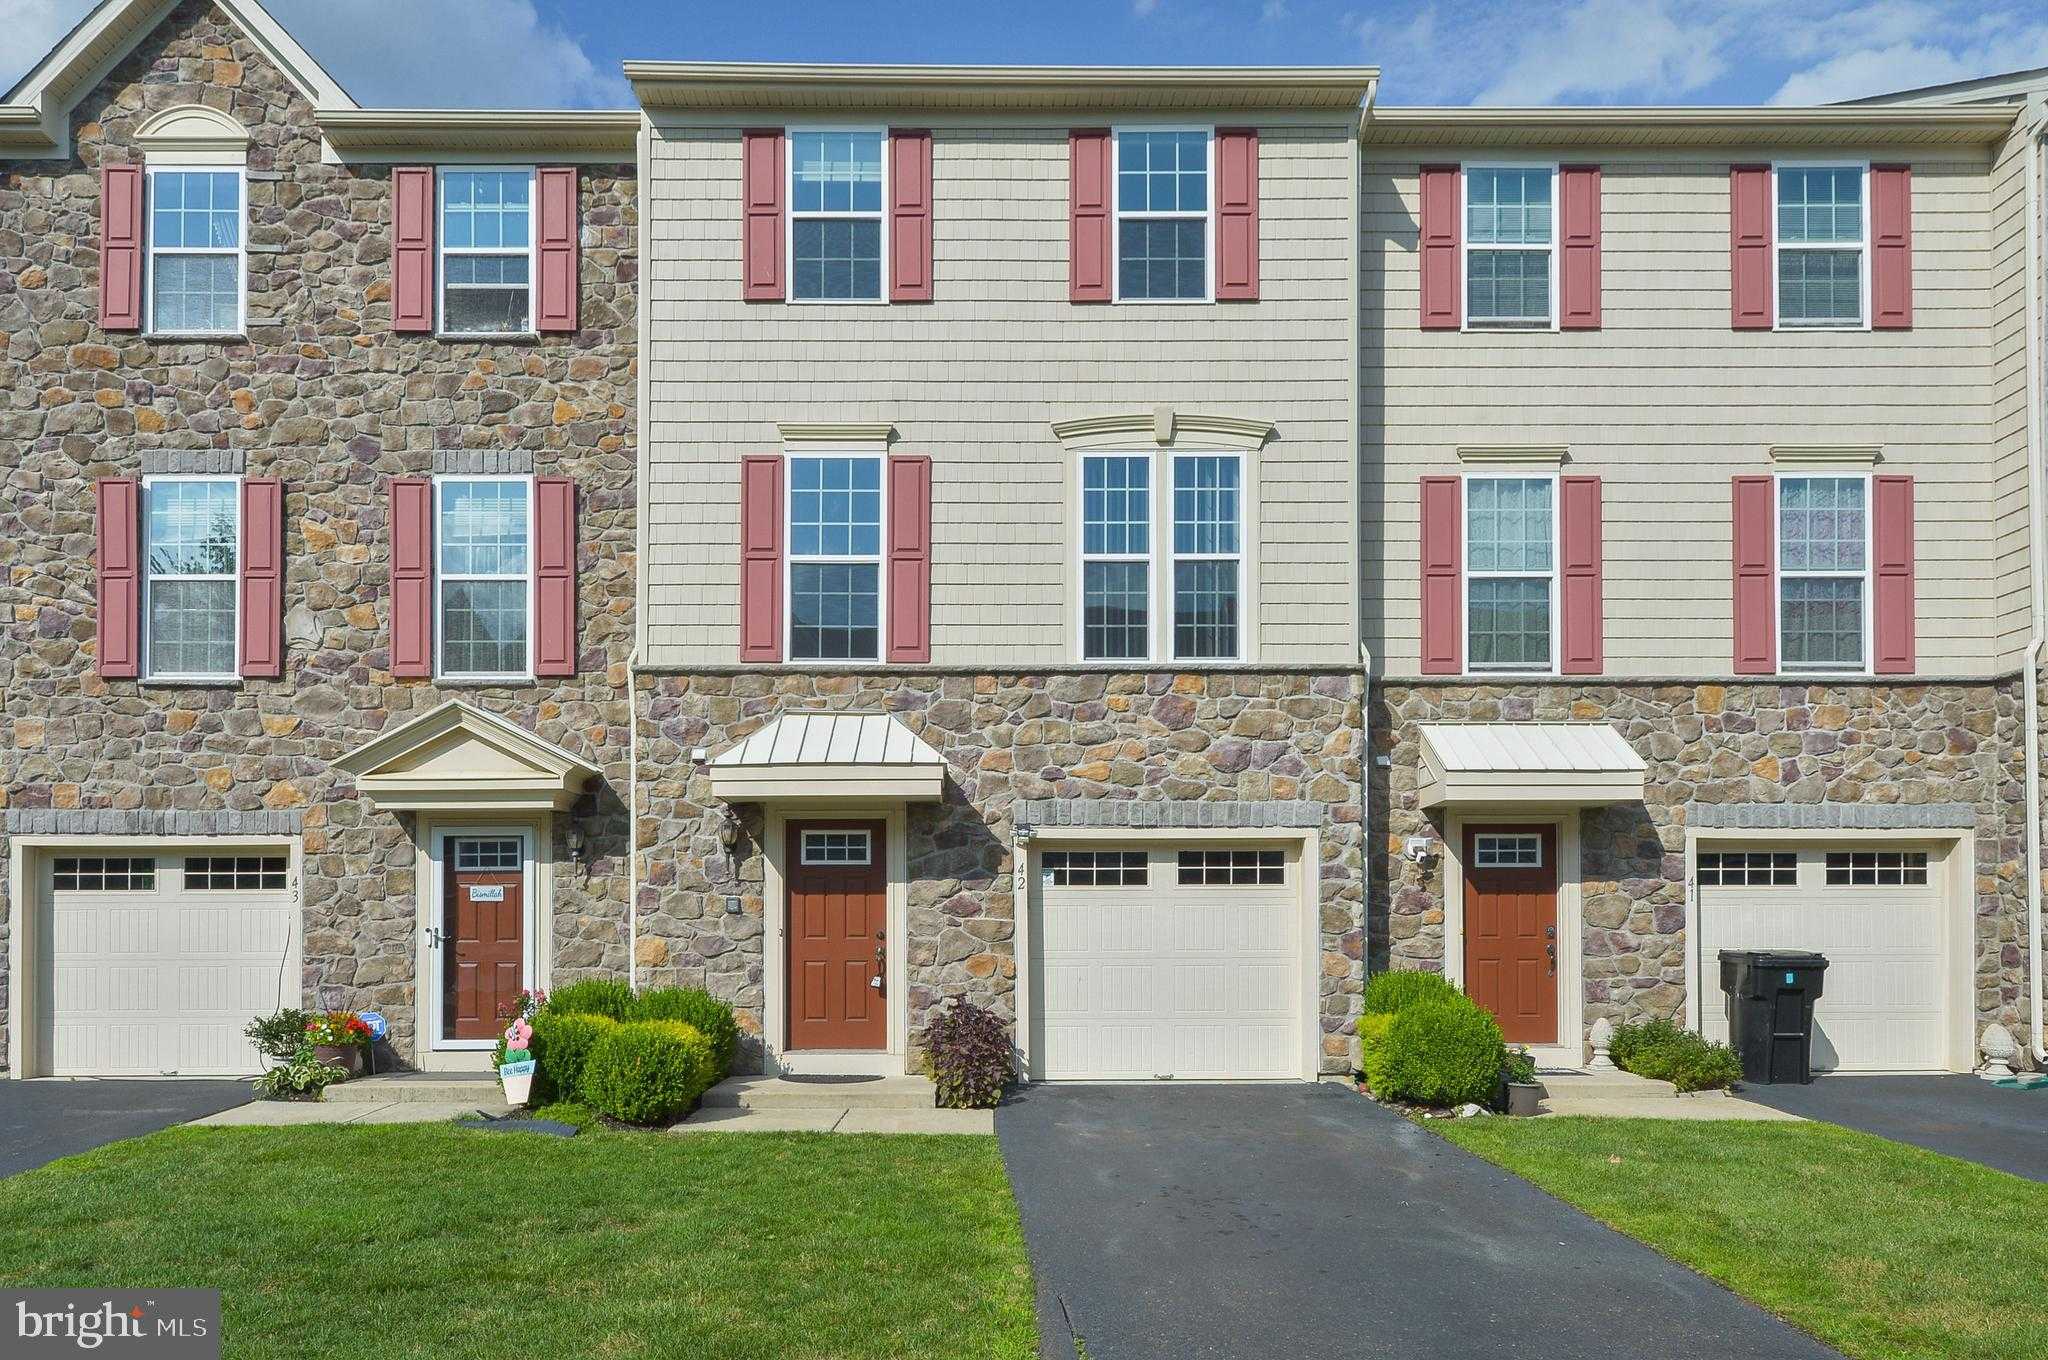 View CLIFFWOOD, NJ 07721 townhome